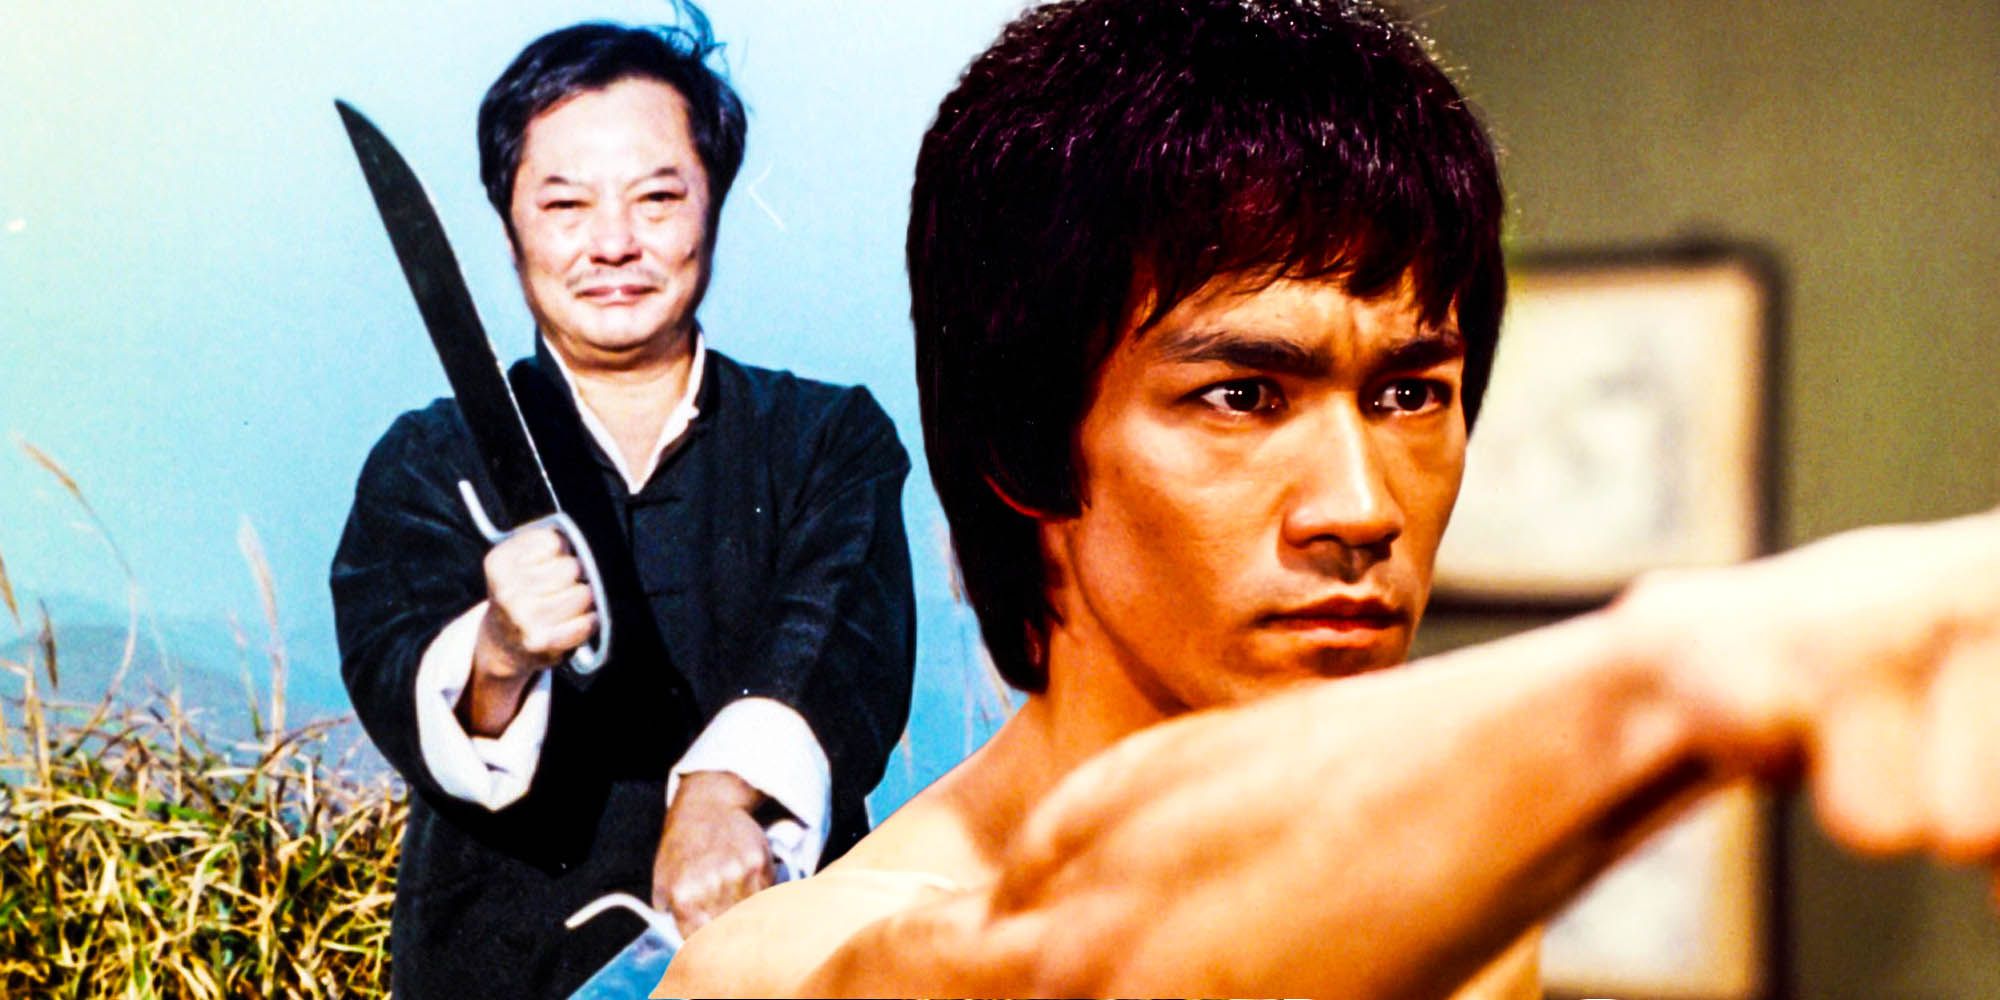 what happened when bruce lee challenged his original master wong shun leung